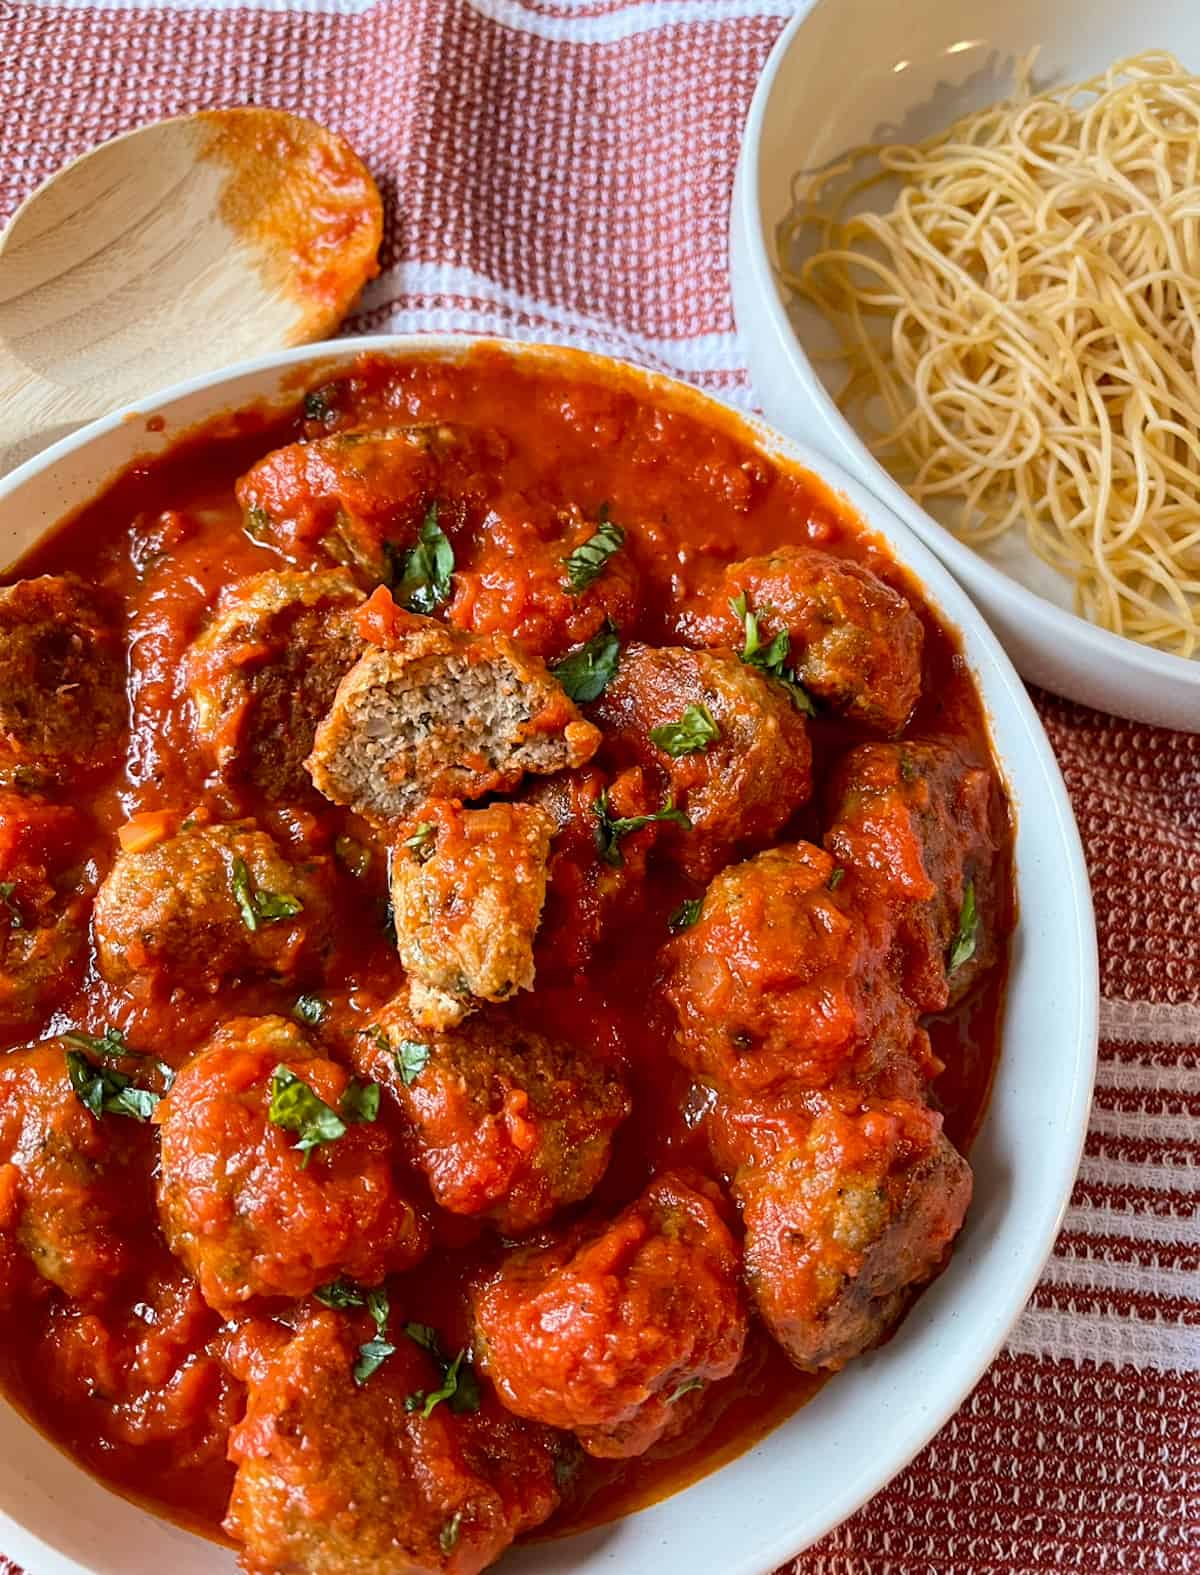 Gluten-free turkey meatballs with marinara sauce in a bowl with gluten-free pasta in another bowl